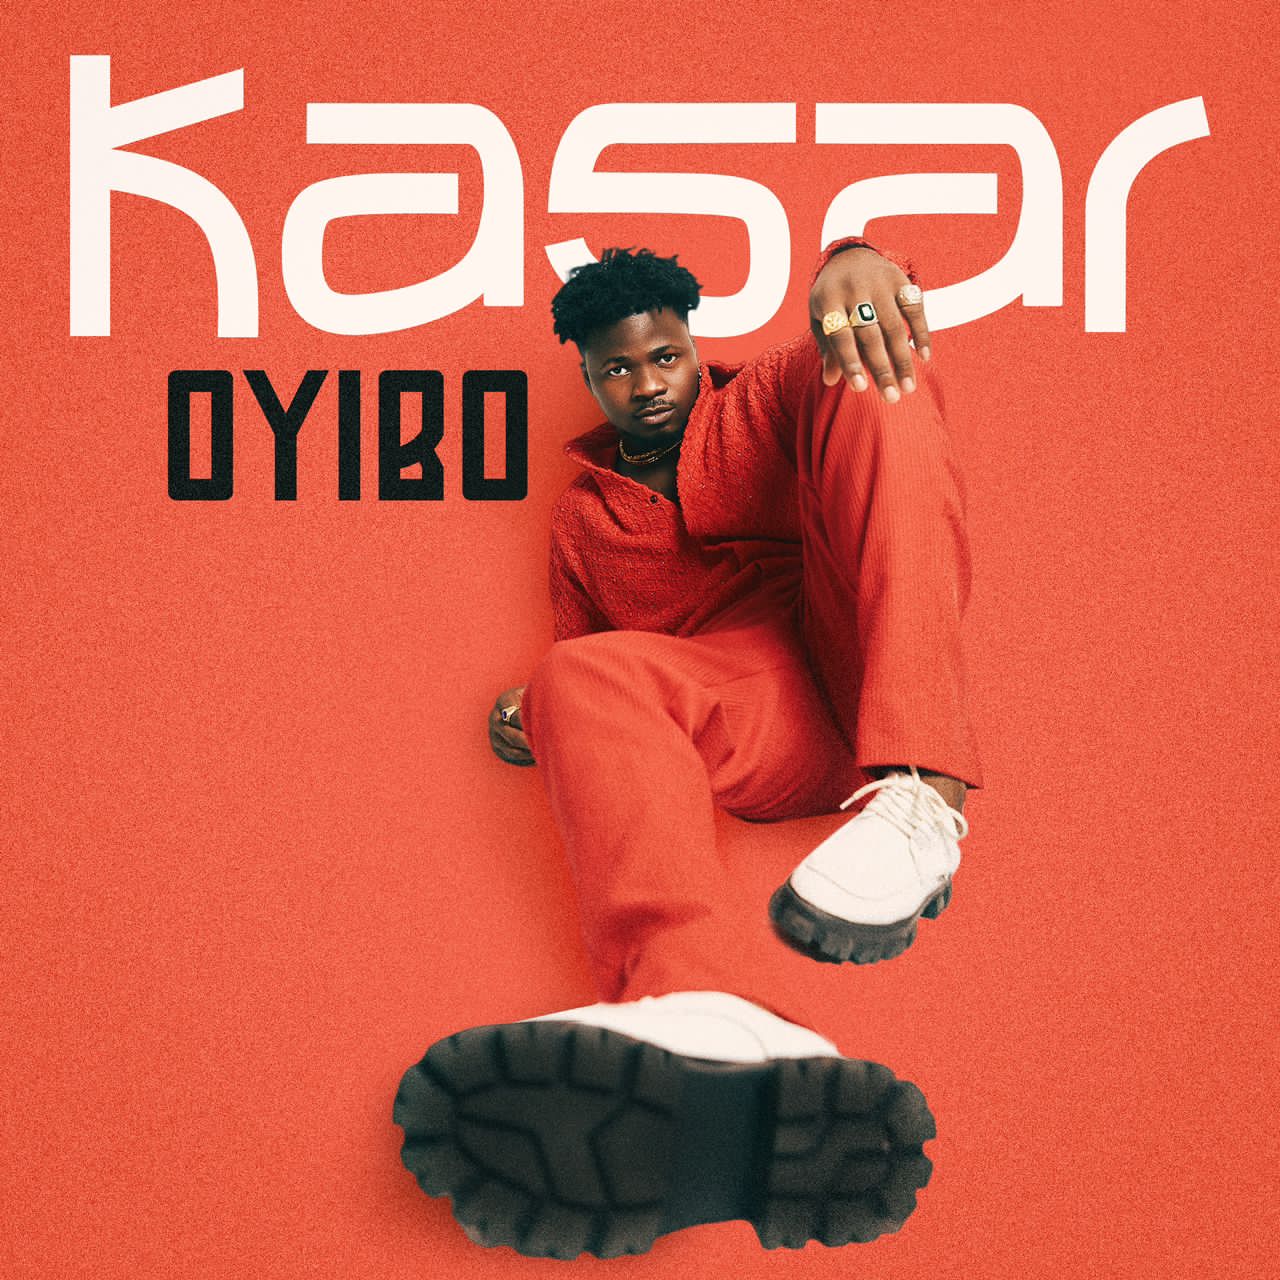 Lynx signee Kasar releases first single ‘Oyibo’ [Video]